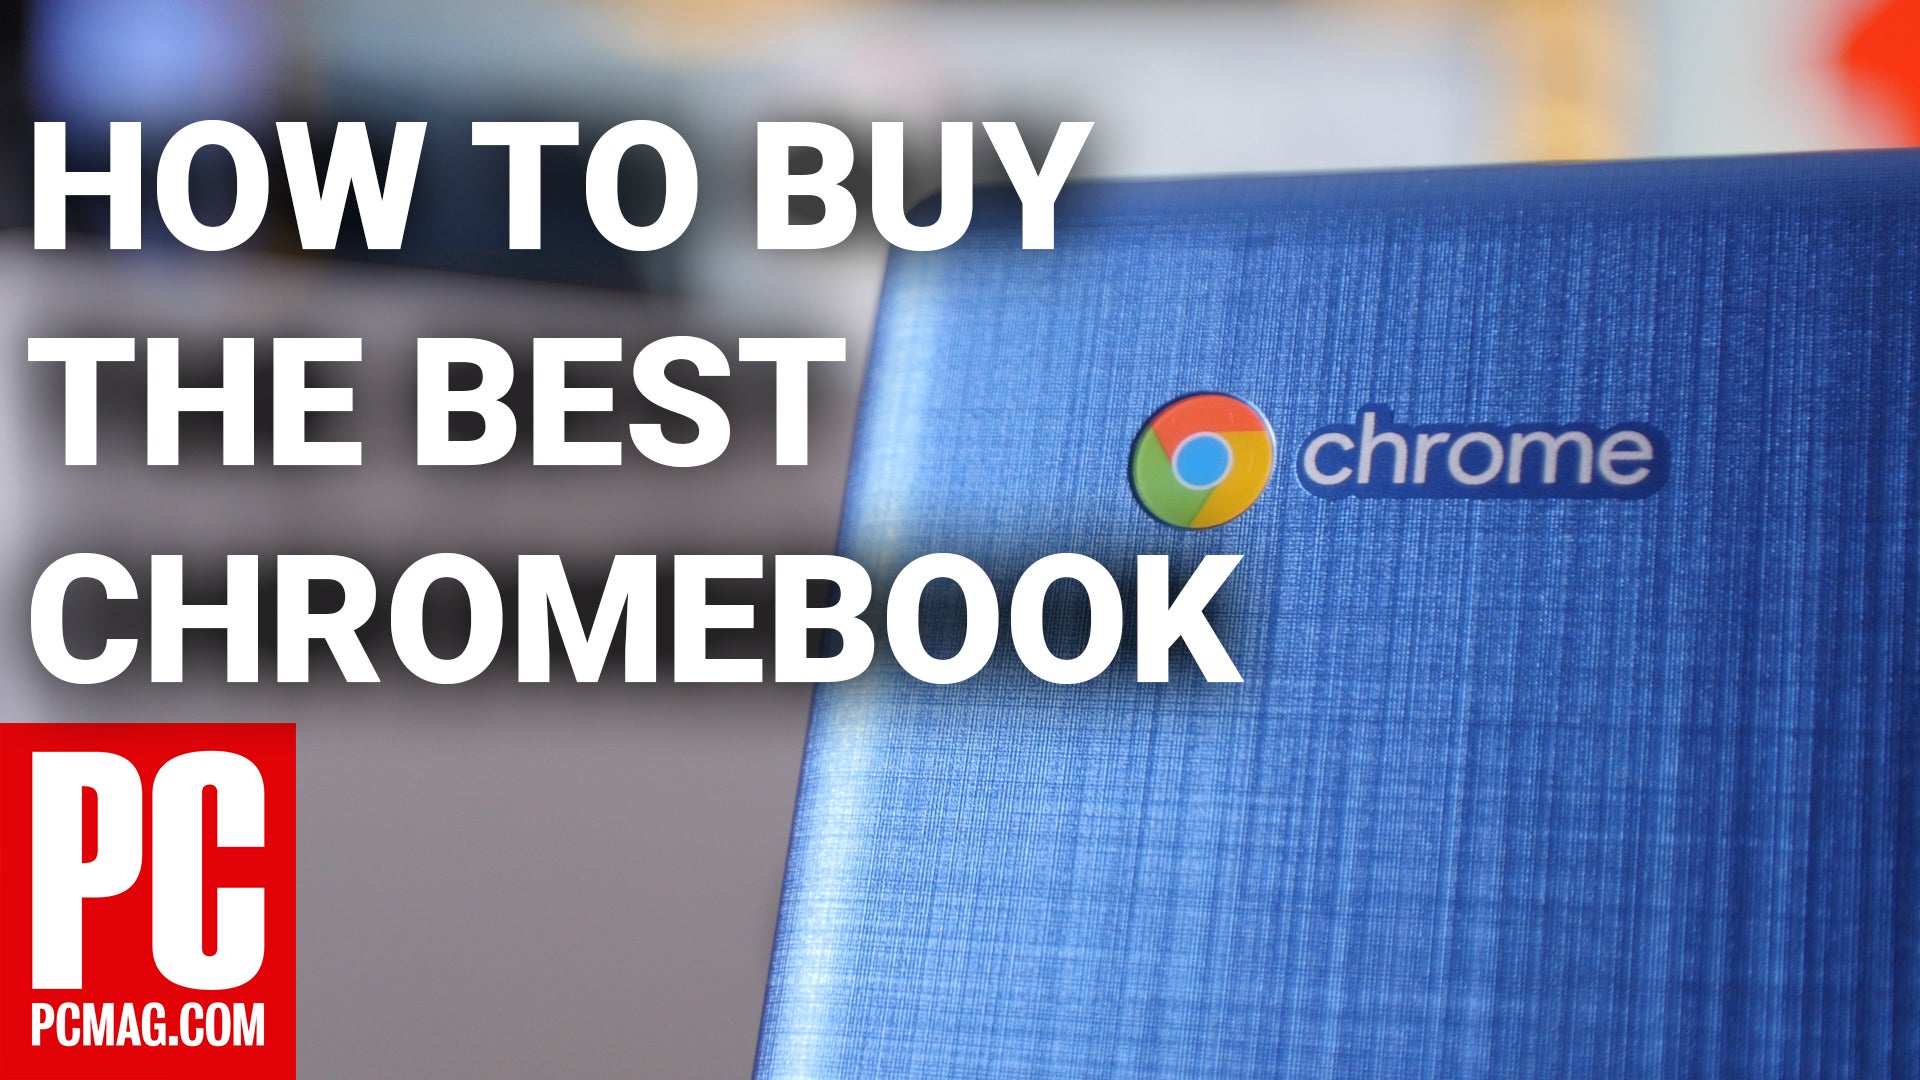 How to Buy the Best Chromebook